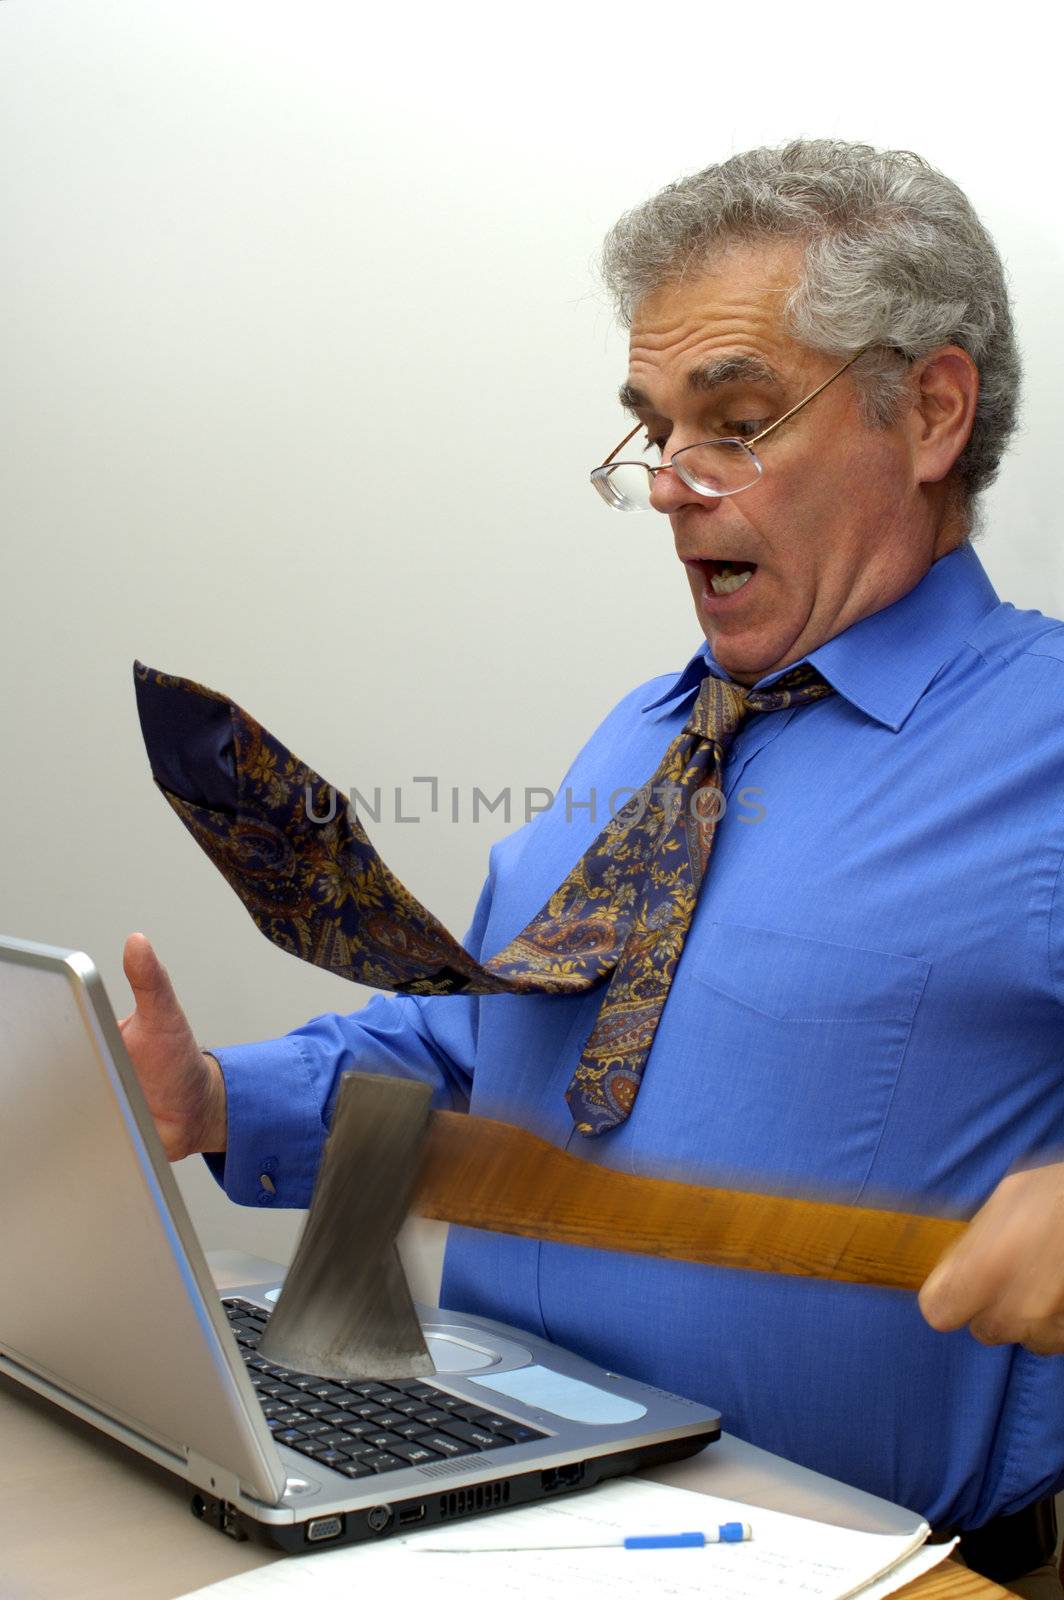 An older businessman fed up with his laptop, takes an axe to it. Motion blur on the axe and his hand. Space for text on the white background.